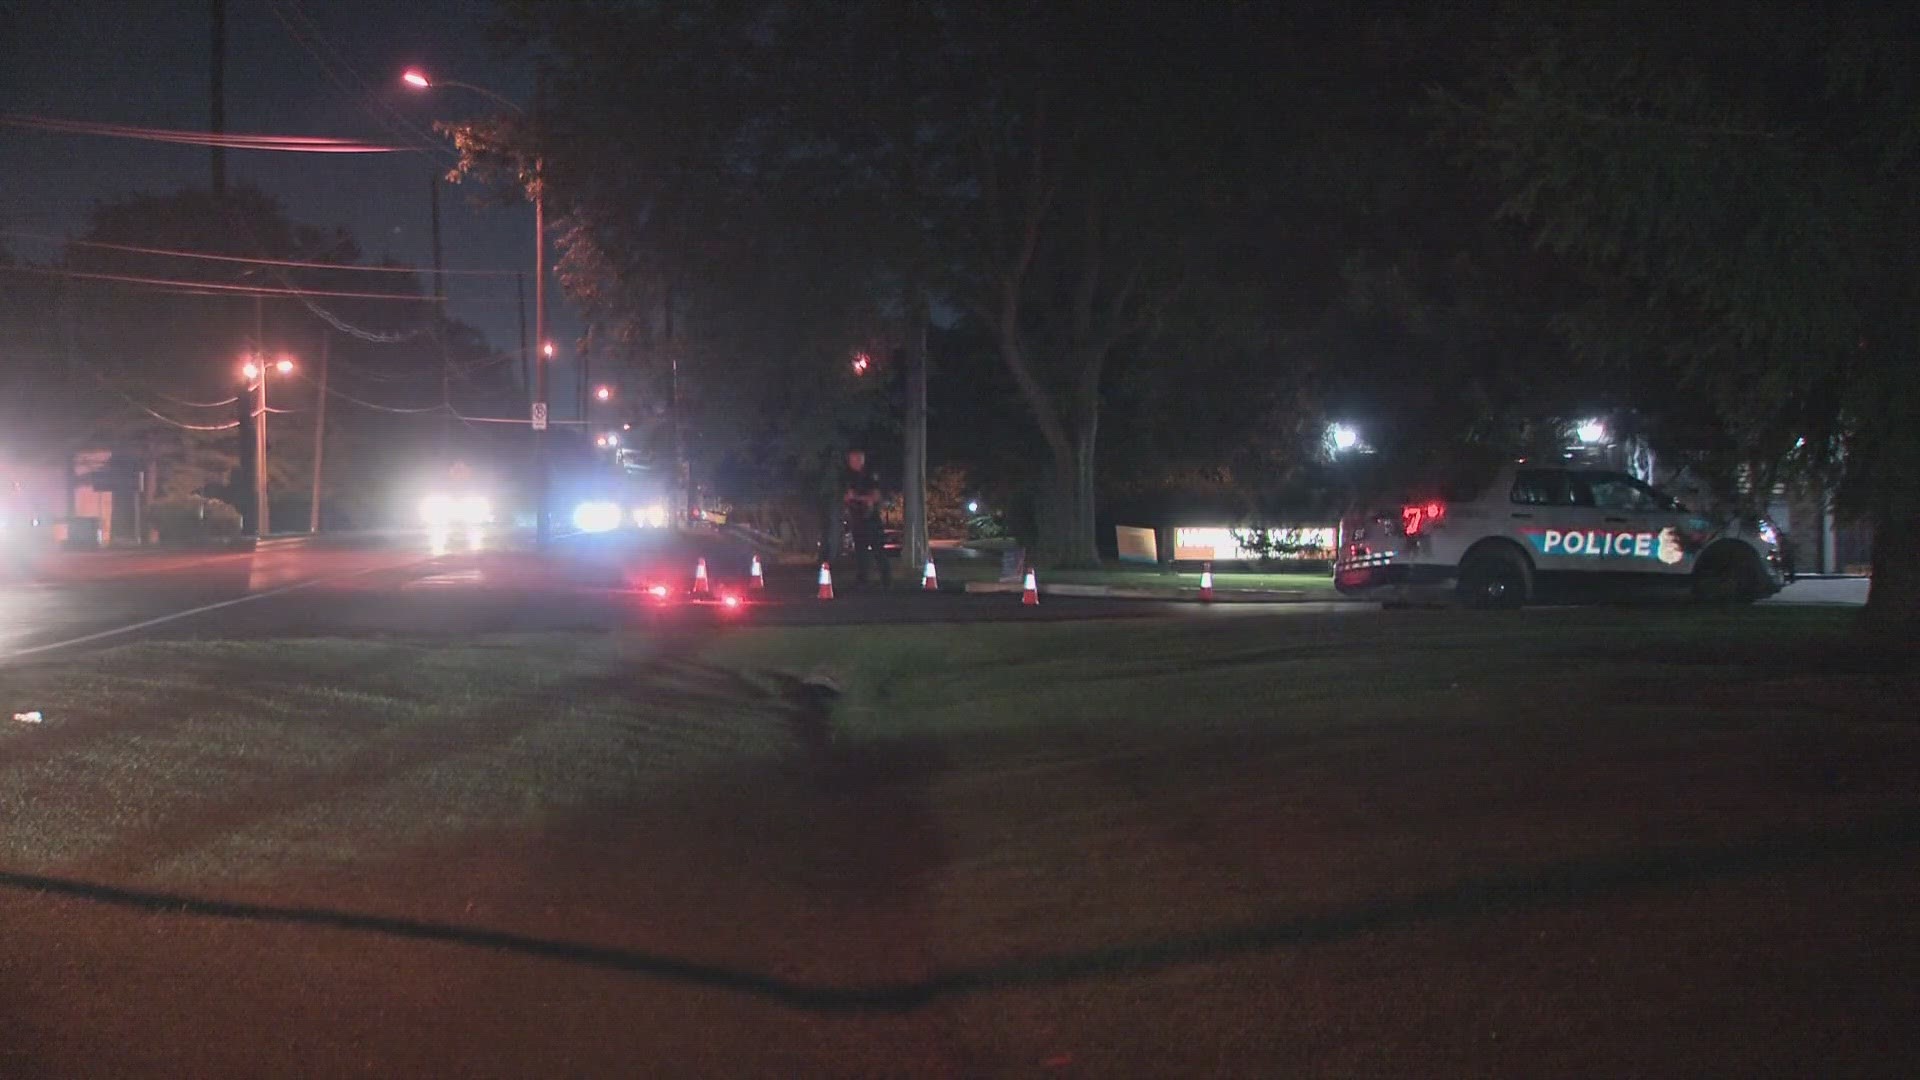 According to the Columbus Division of Police, a vehicle hit a pedestrian around 10:15 p.m. in the 2300 block of Eakin Road and then fled the scene.